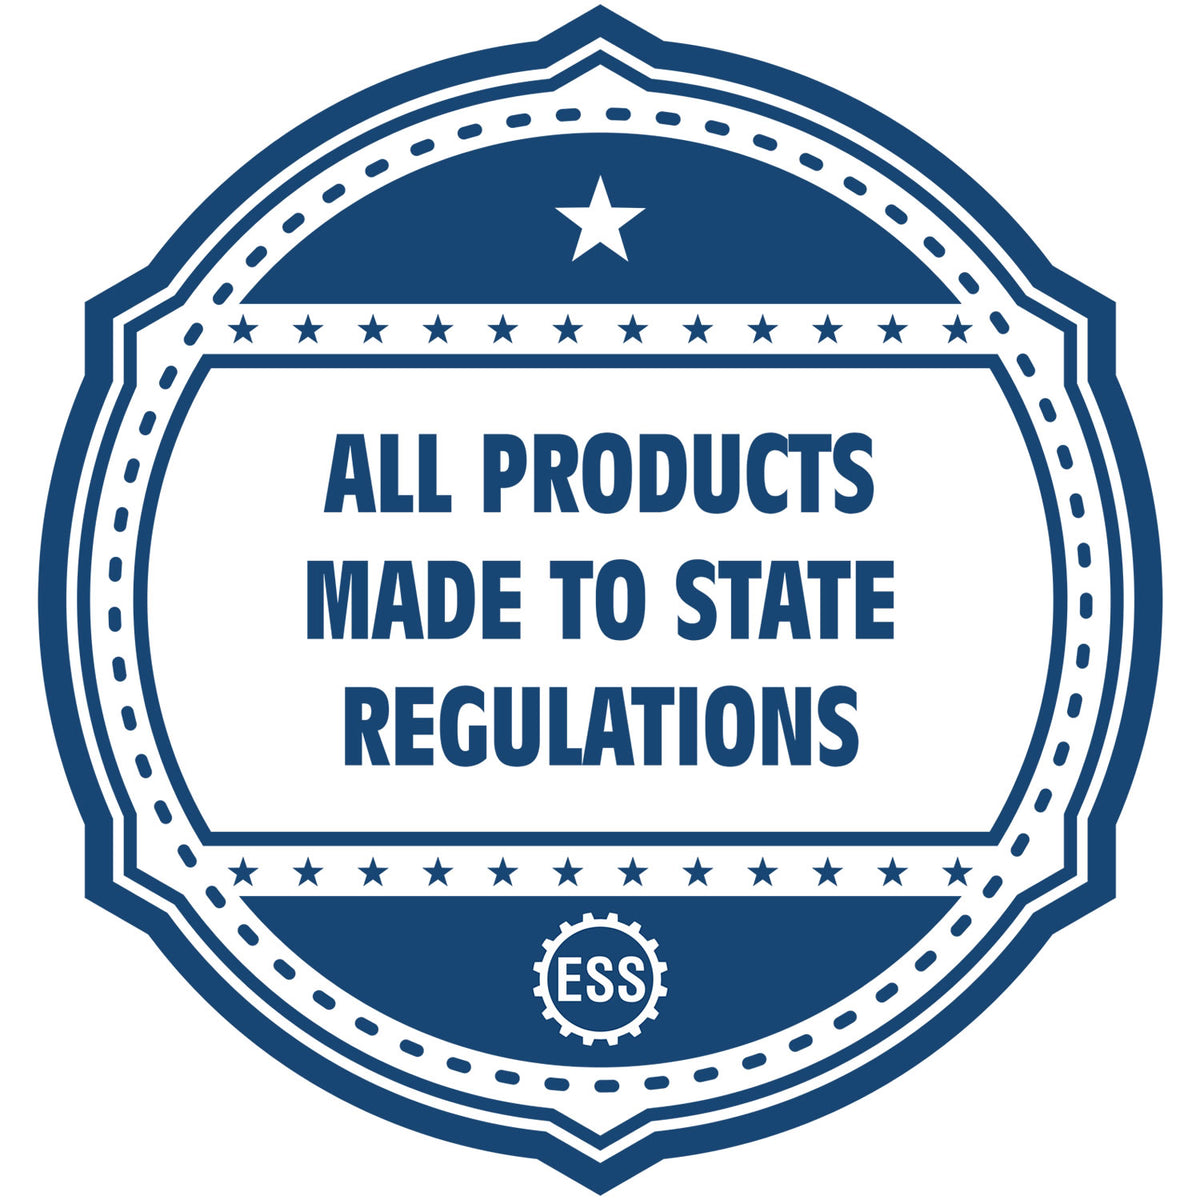 An icon or badge element for the Indiana Engineer Desk Seal showing that this product is made in compliance with state regulations.